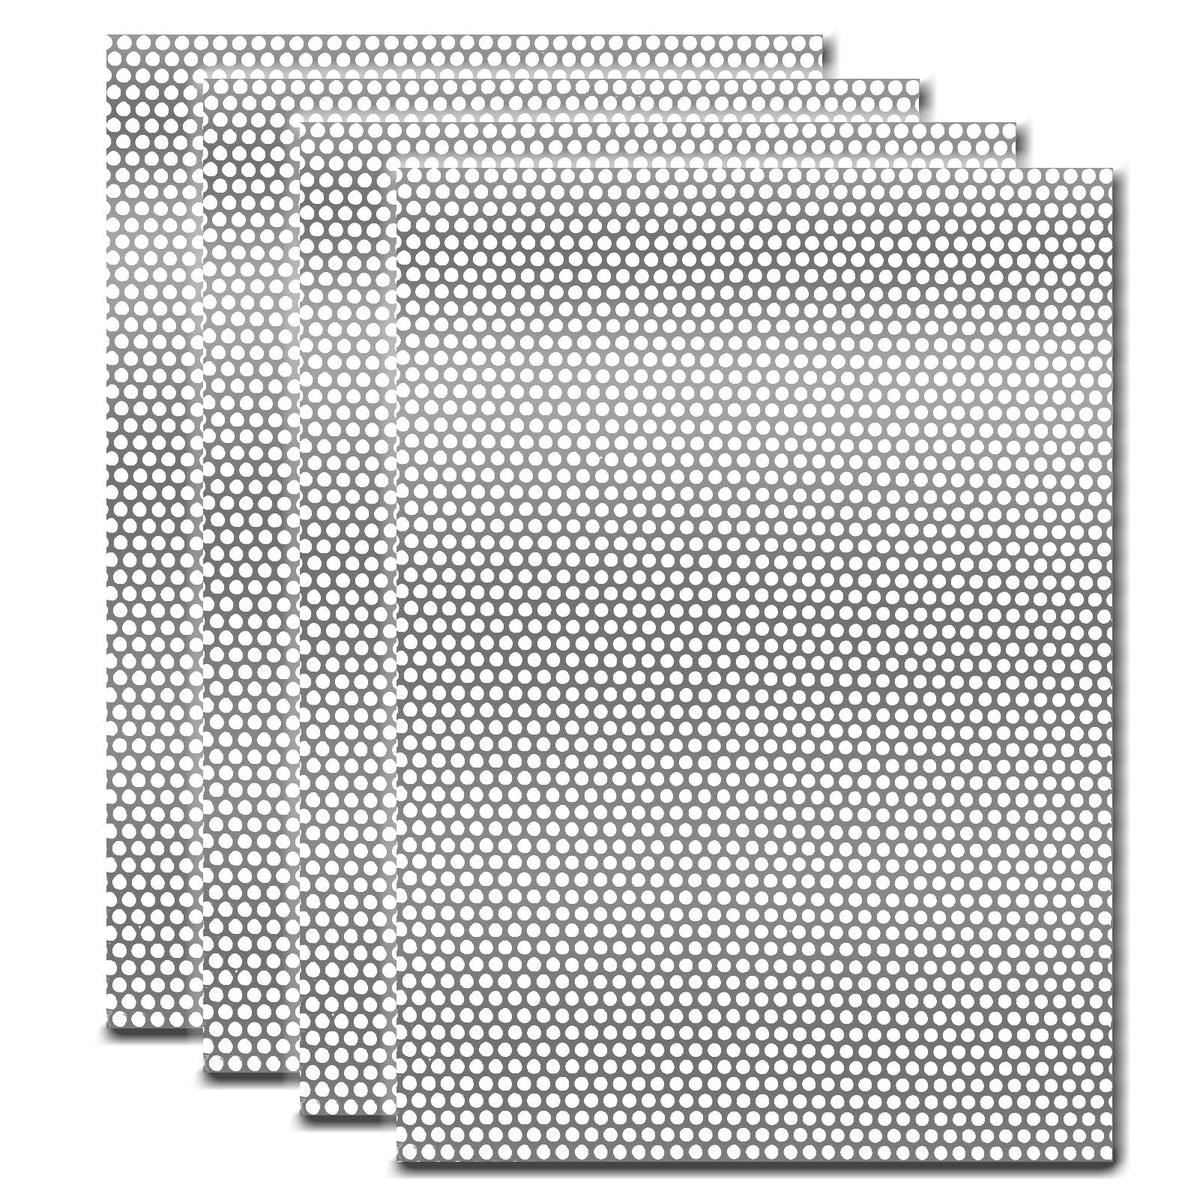 4 Packs Wire Mesh Panels, Mouse Rodent Insect Mesh for Vents, Aluminum-Magnesium Alloy Mesh Sheet for Home, Kitchen, Garden, 210 x 300 mm